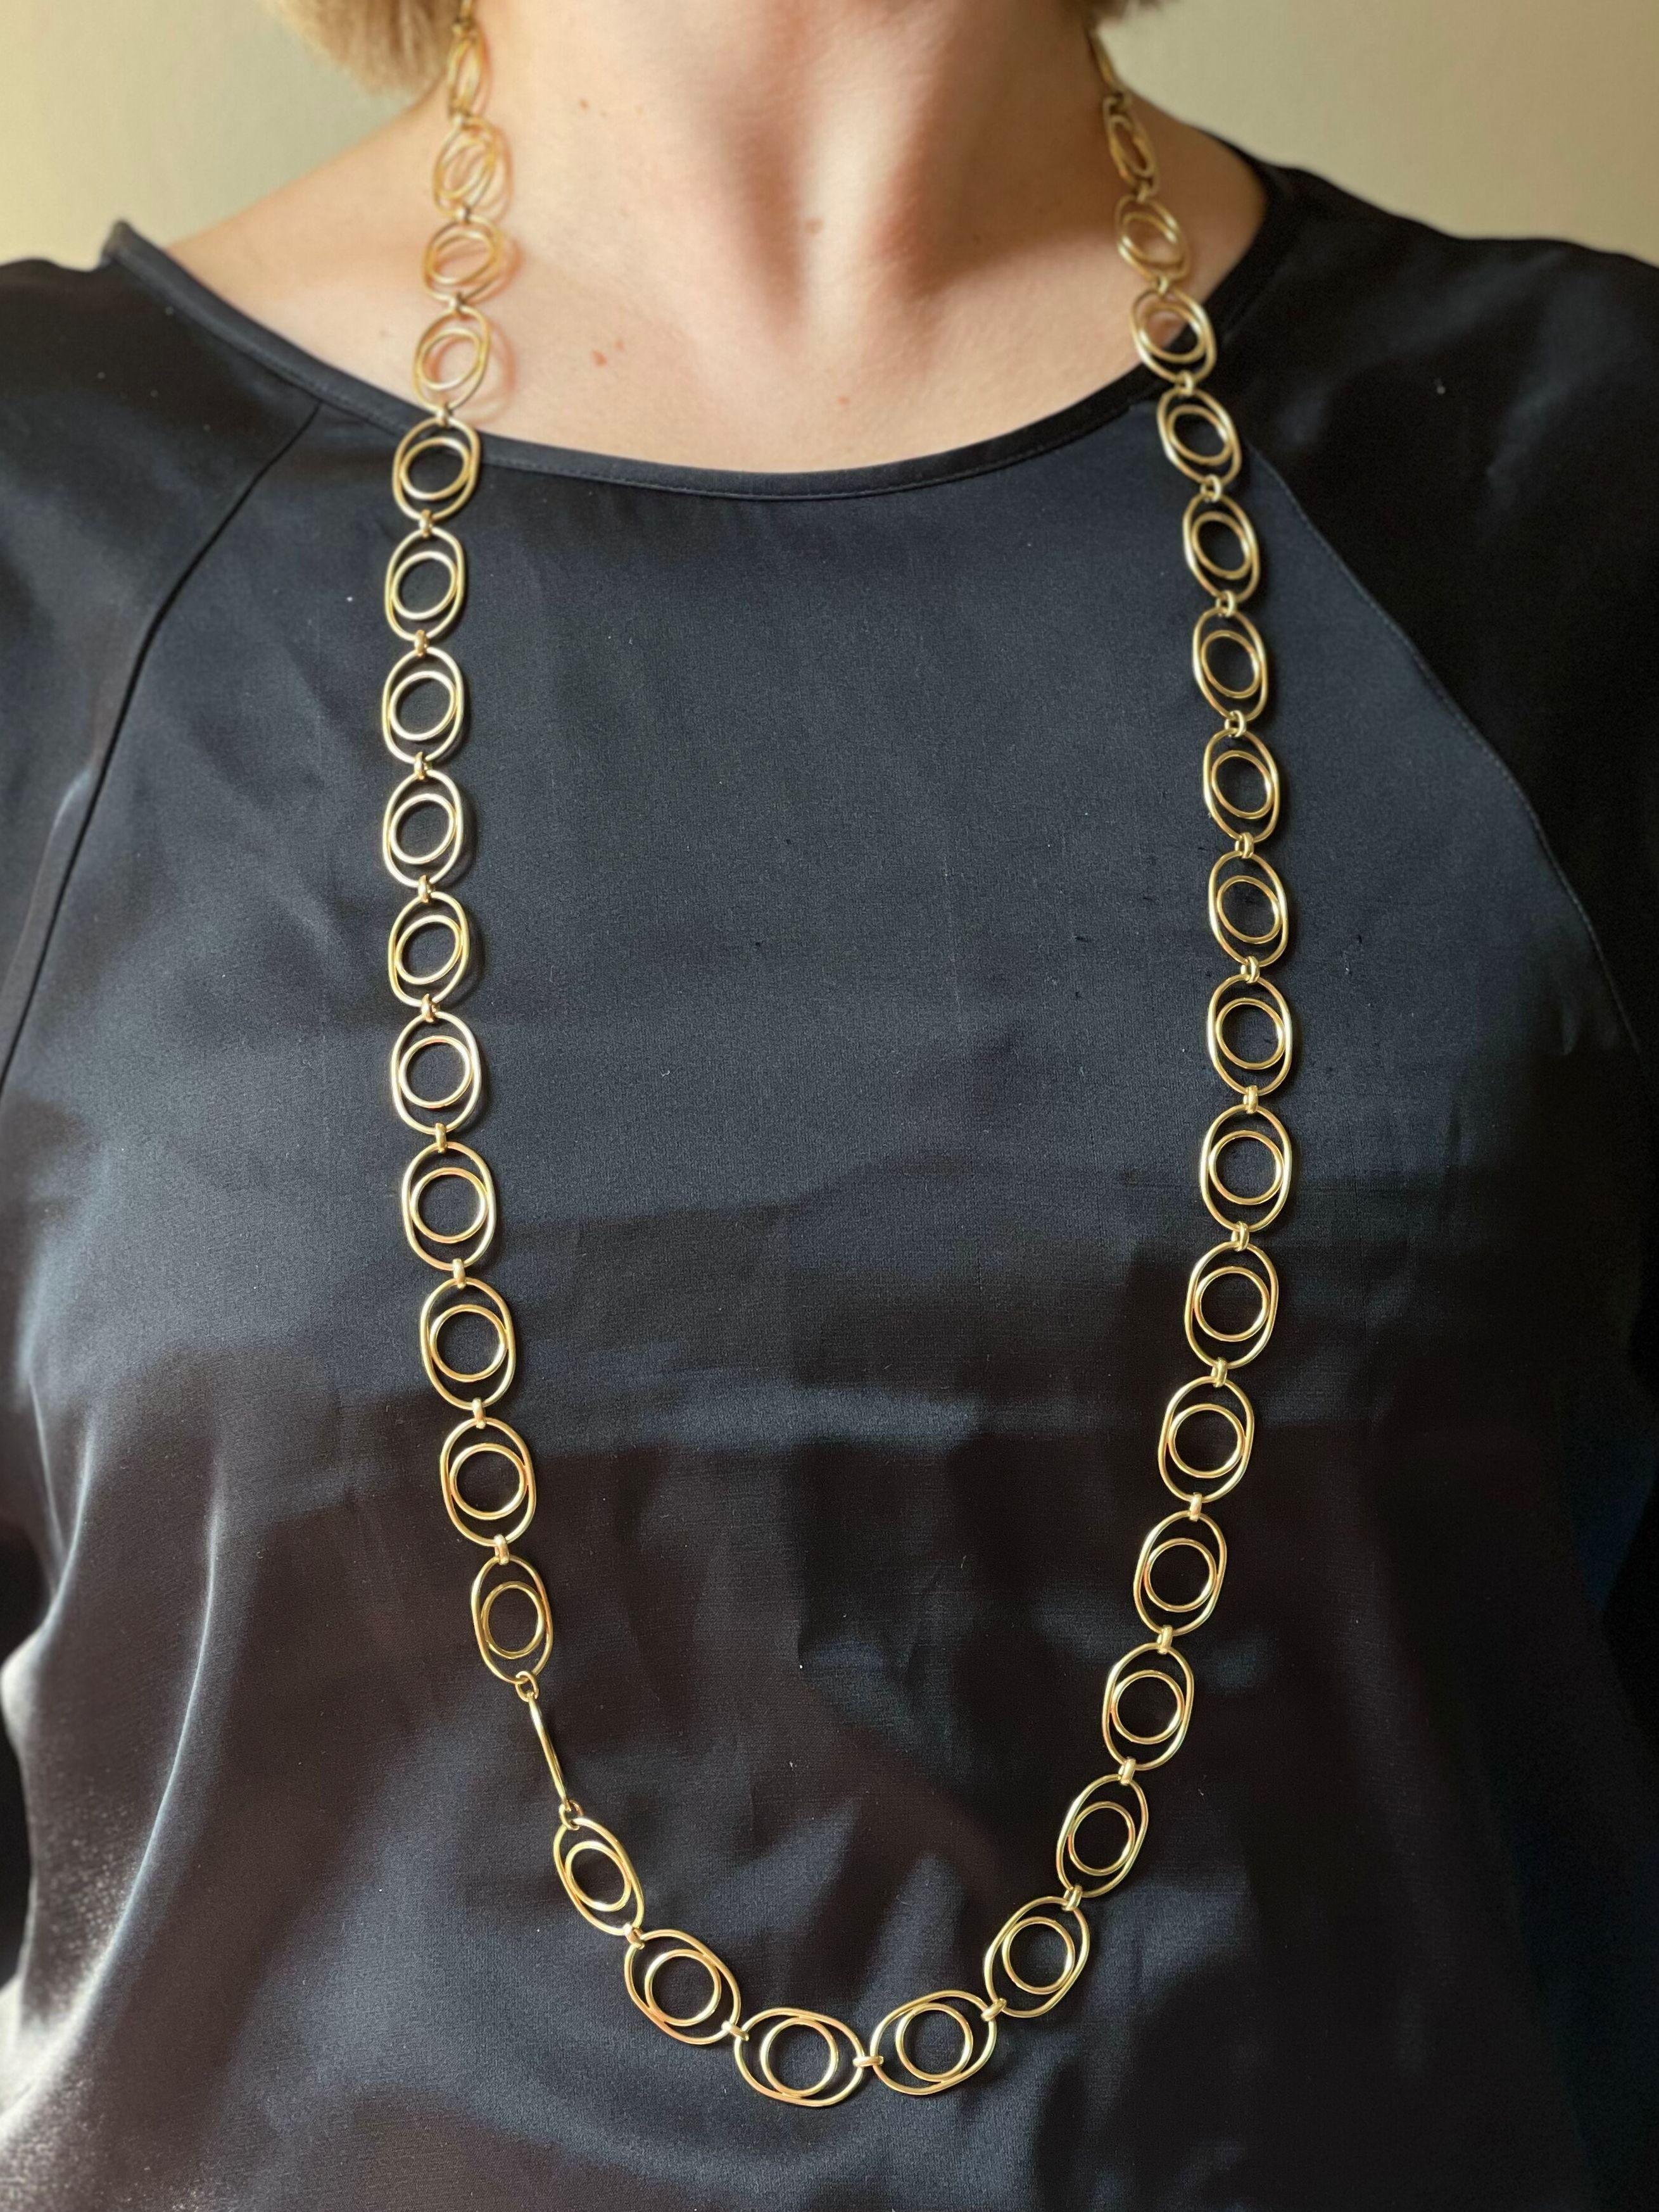 1980s 18k gold long necklace, featuring circle and oval links. Necklace is 40